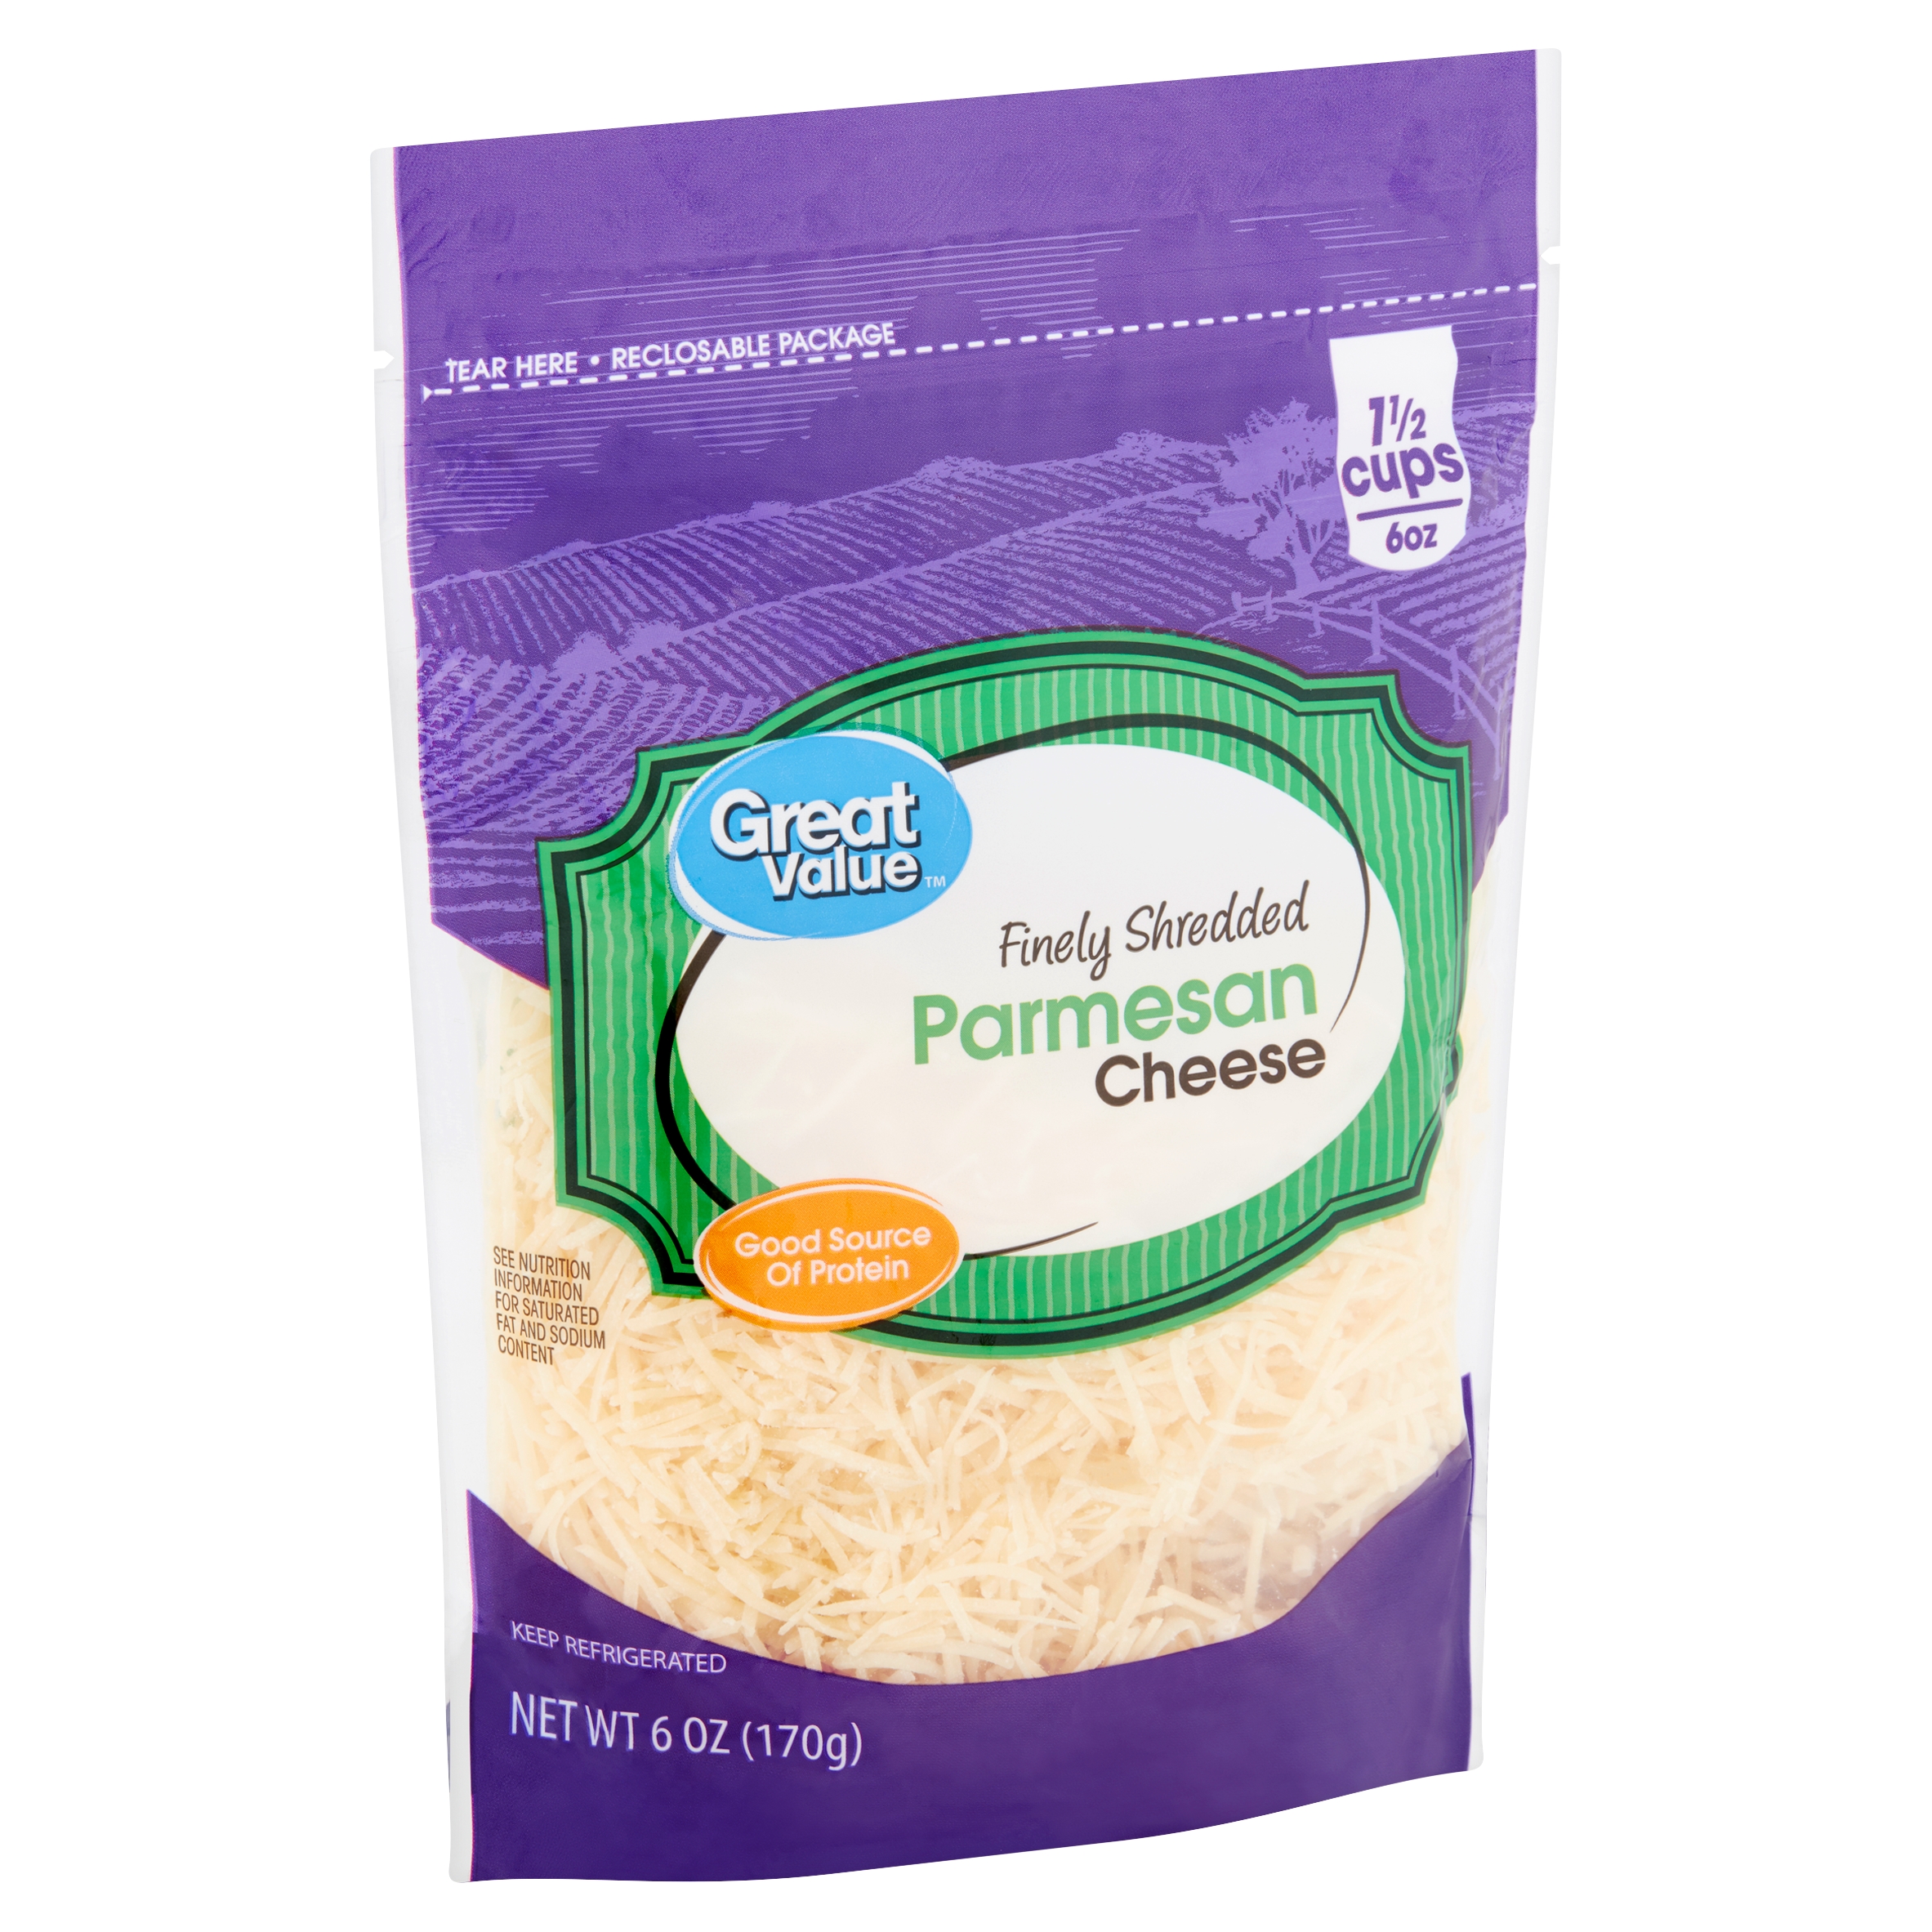 Great Value Finely Shredded Parmesan Cheese, 6 Oz Image